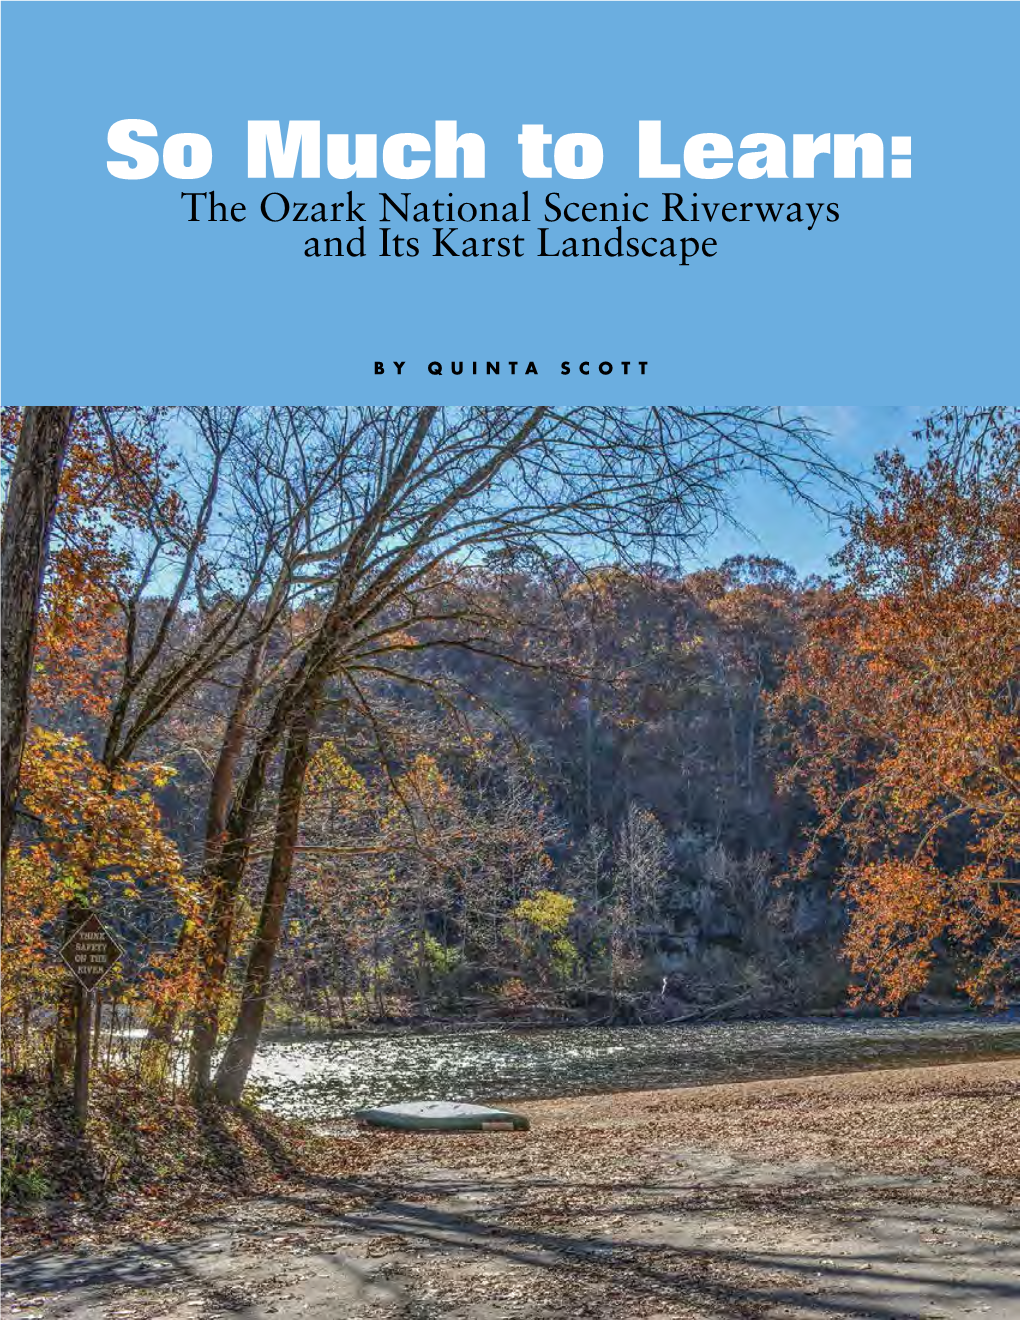 The Confluence | Fall/Winter 2016–2017 Paddle the Spring-Fed Rivers of Ozark National Forest South of Winona